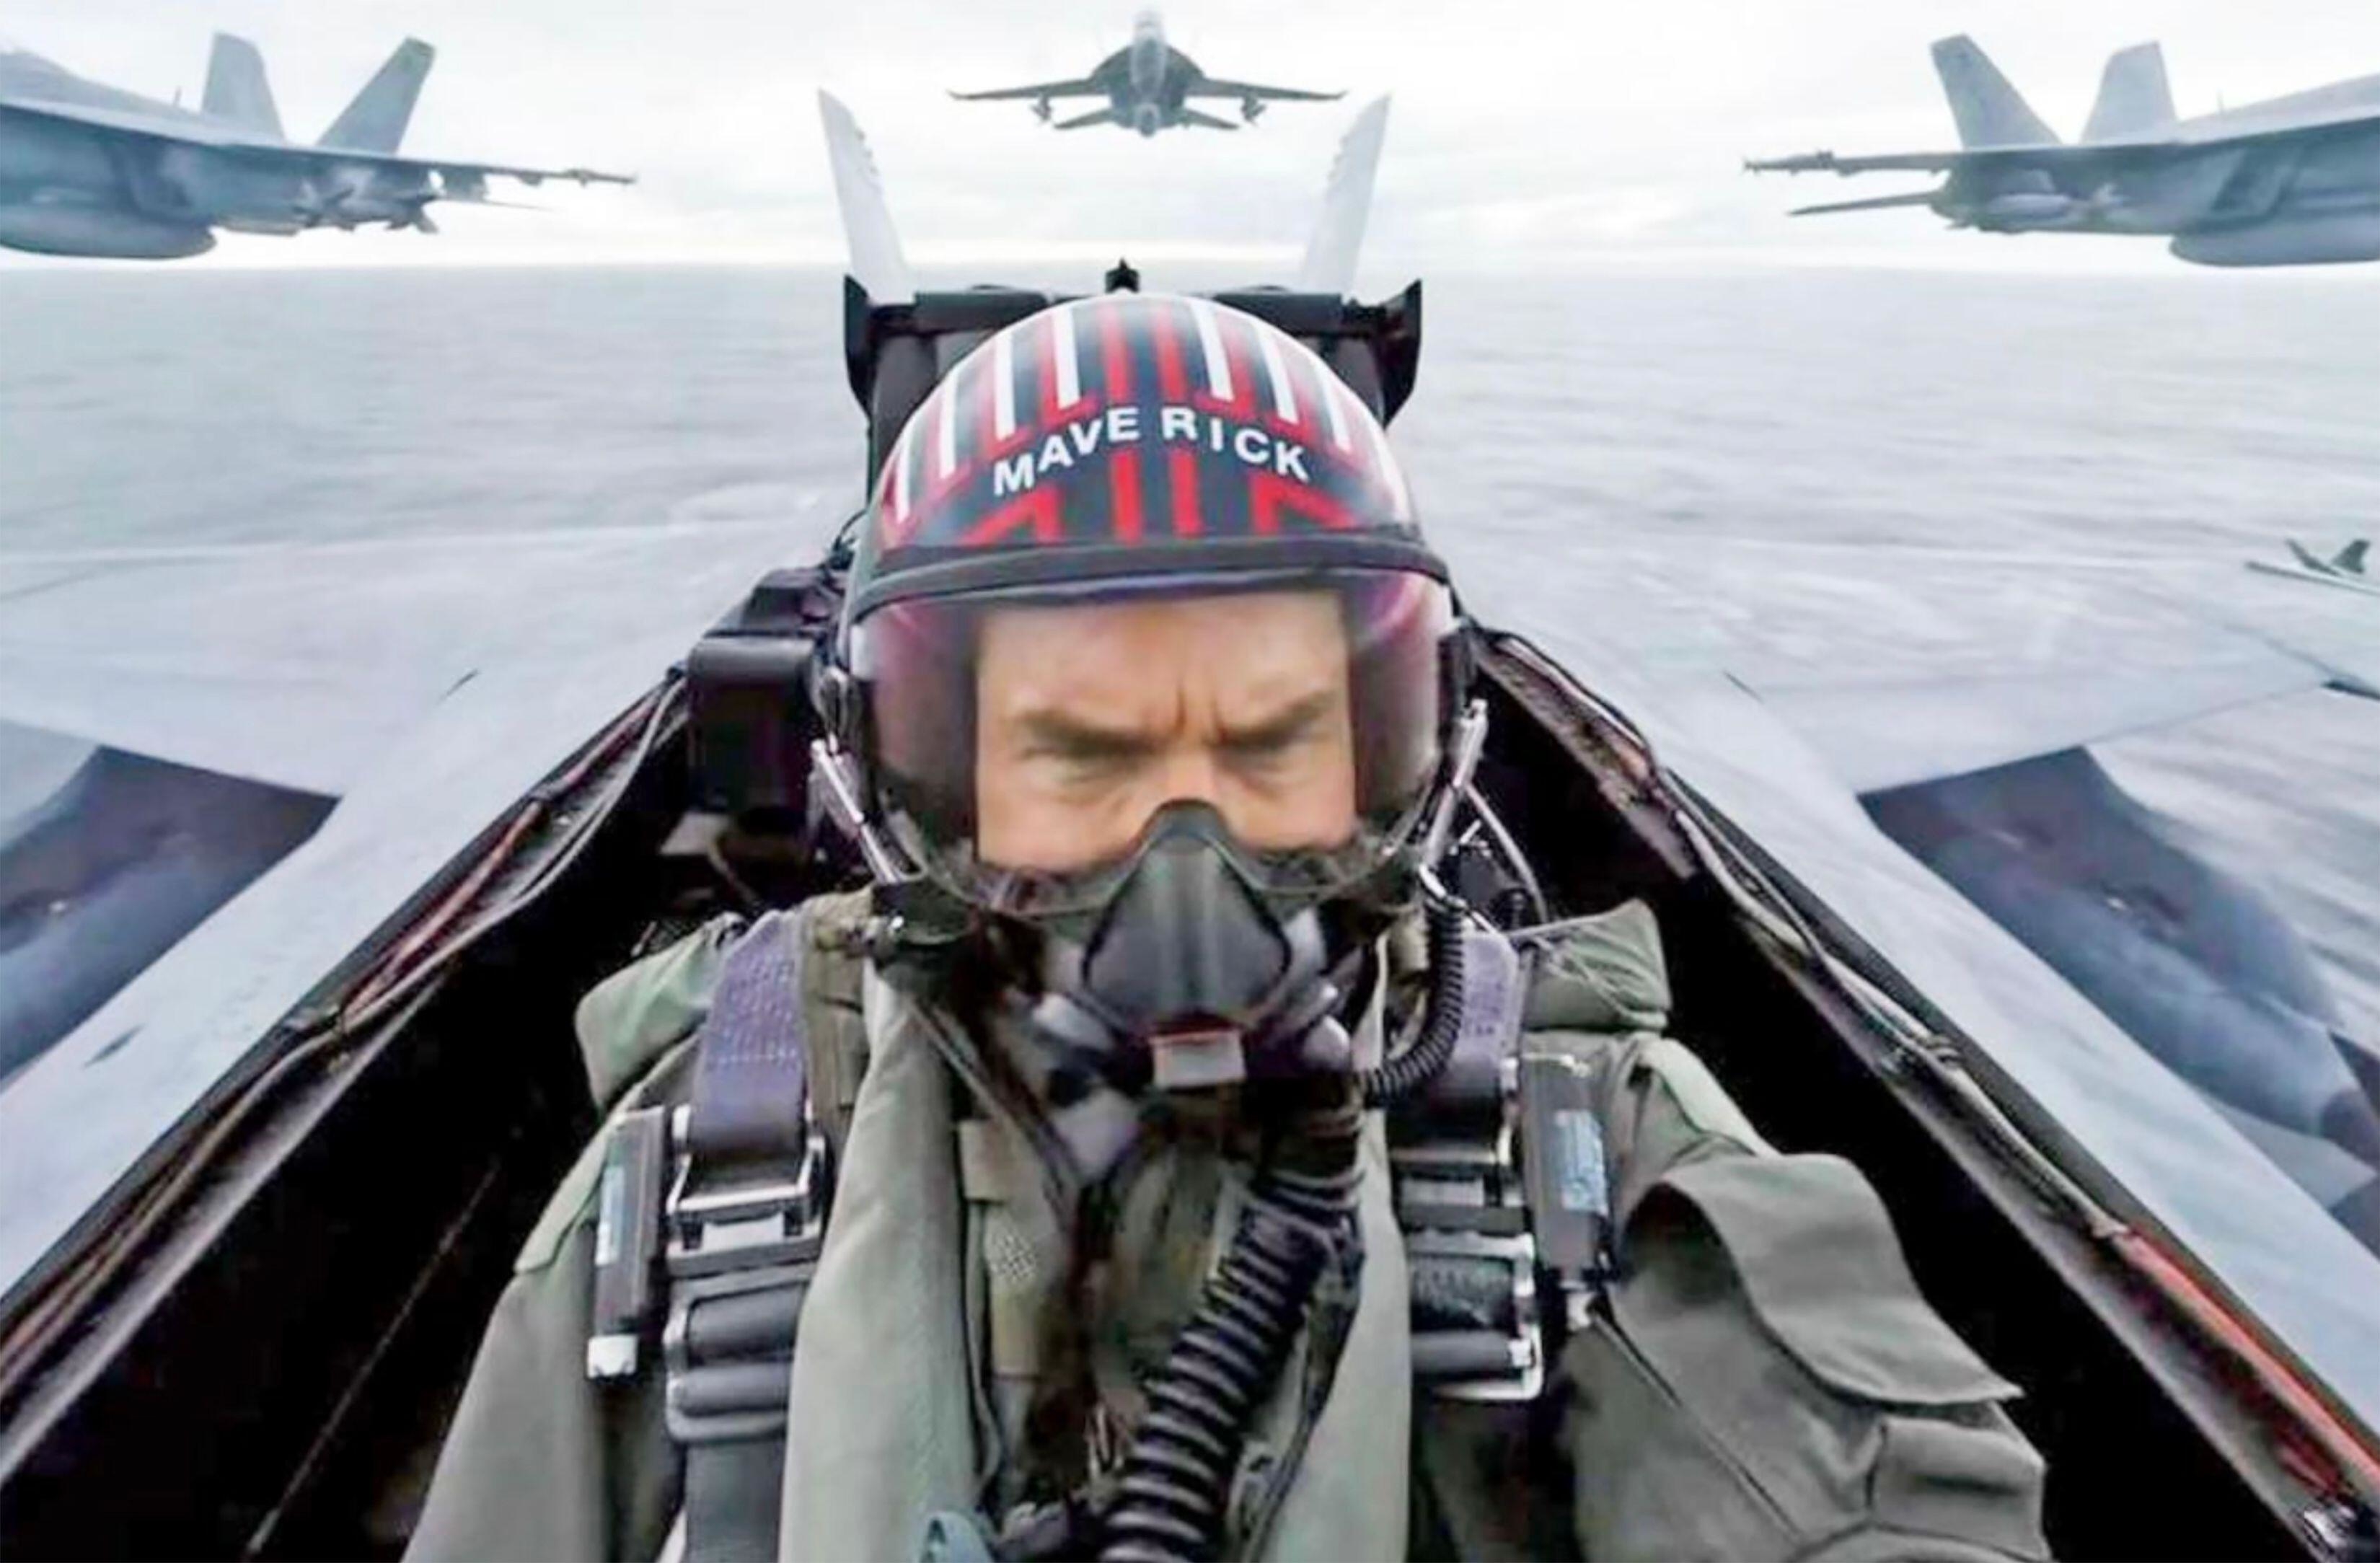 Tom Cruise soars above the ocean in a jet plane near a number of additional aircraft